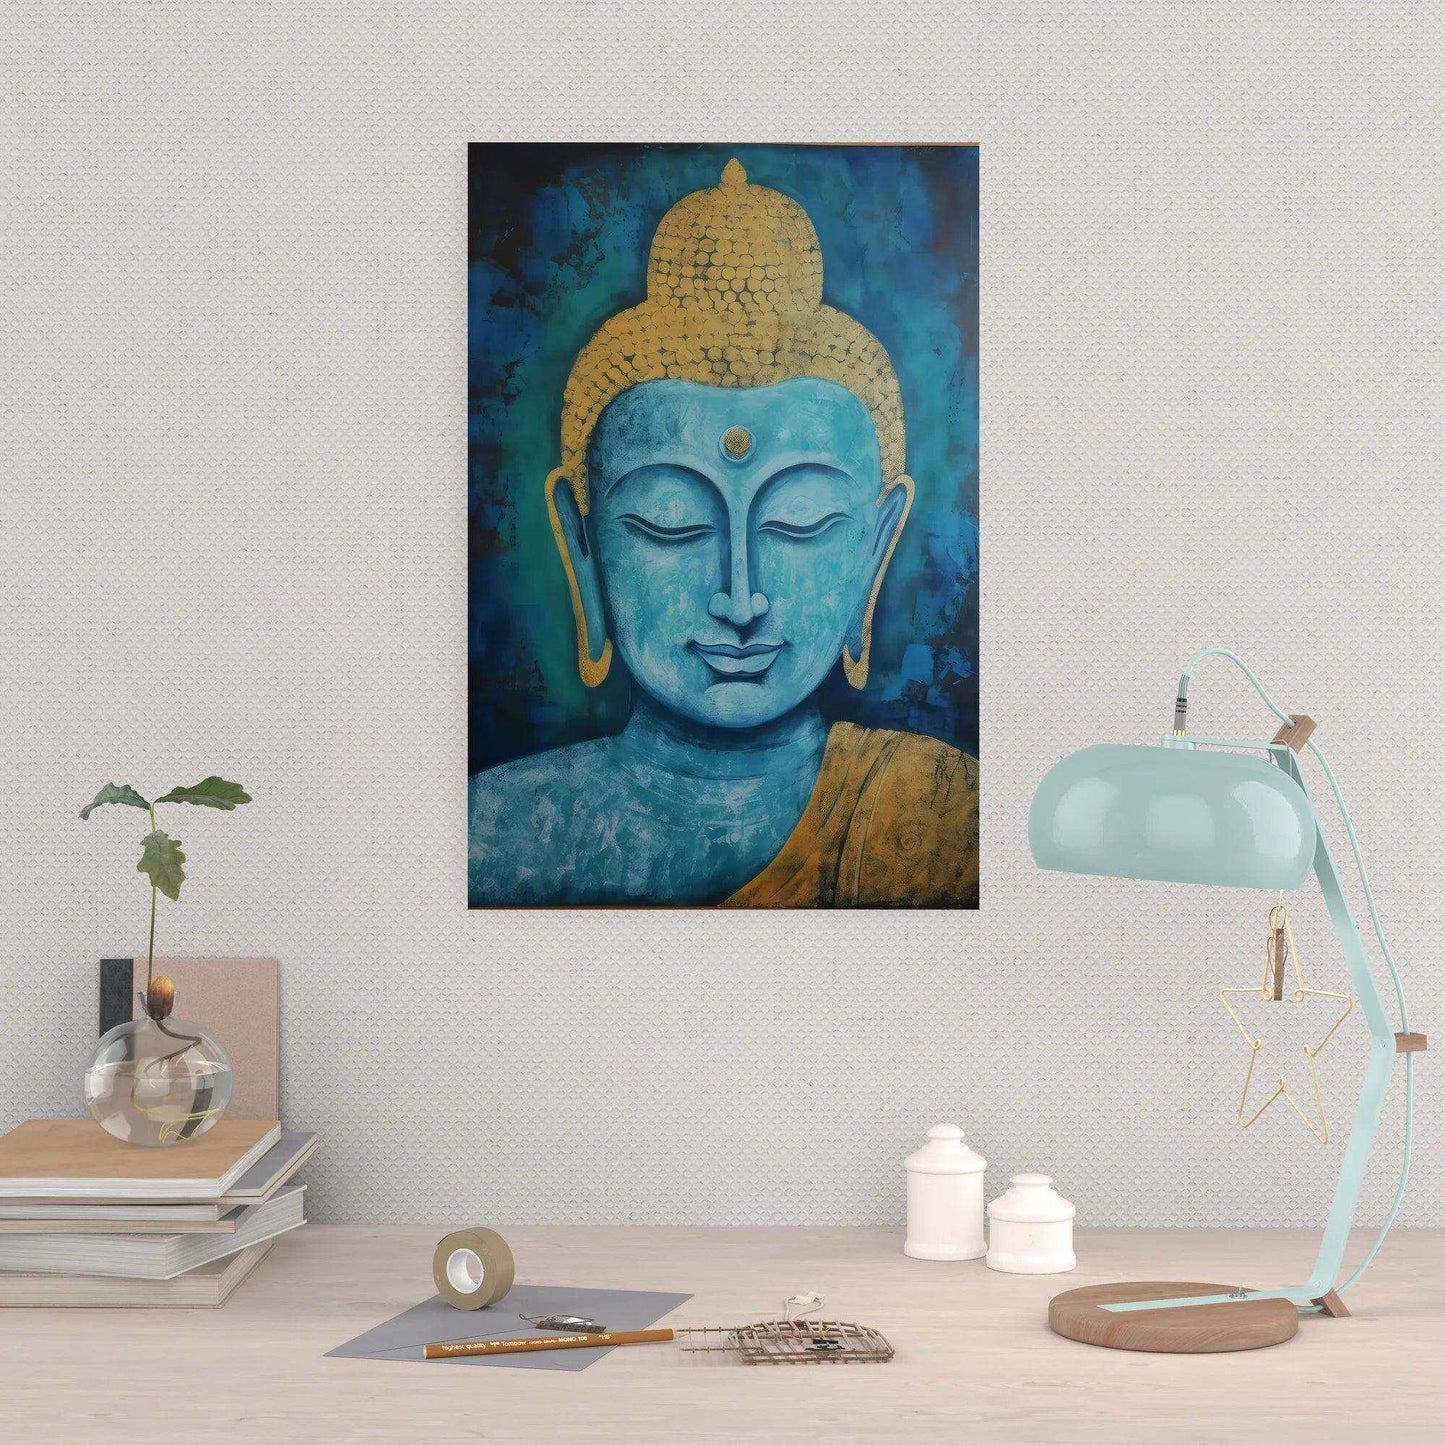 A calming workspace is accented by a textured wall hanging a blue and gold Buddha painting above a neat desk, with decorative items including a modern lamp, a glass vase with a young plant, and stationary, harmoniously blending mindfulness into daily life.